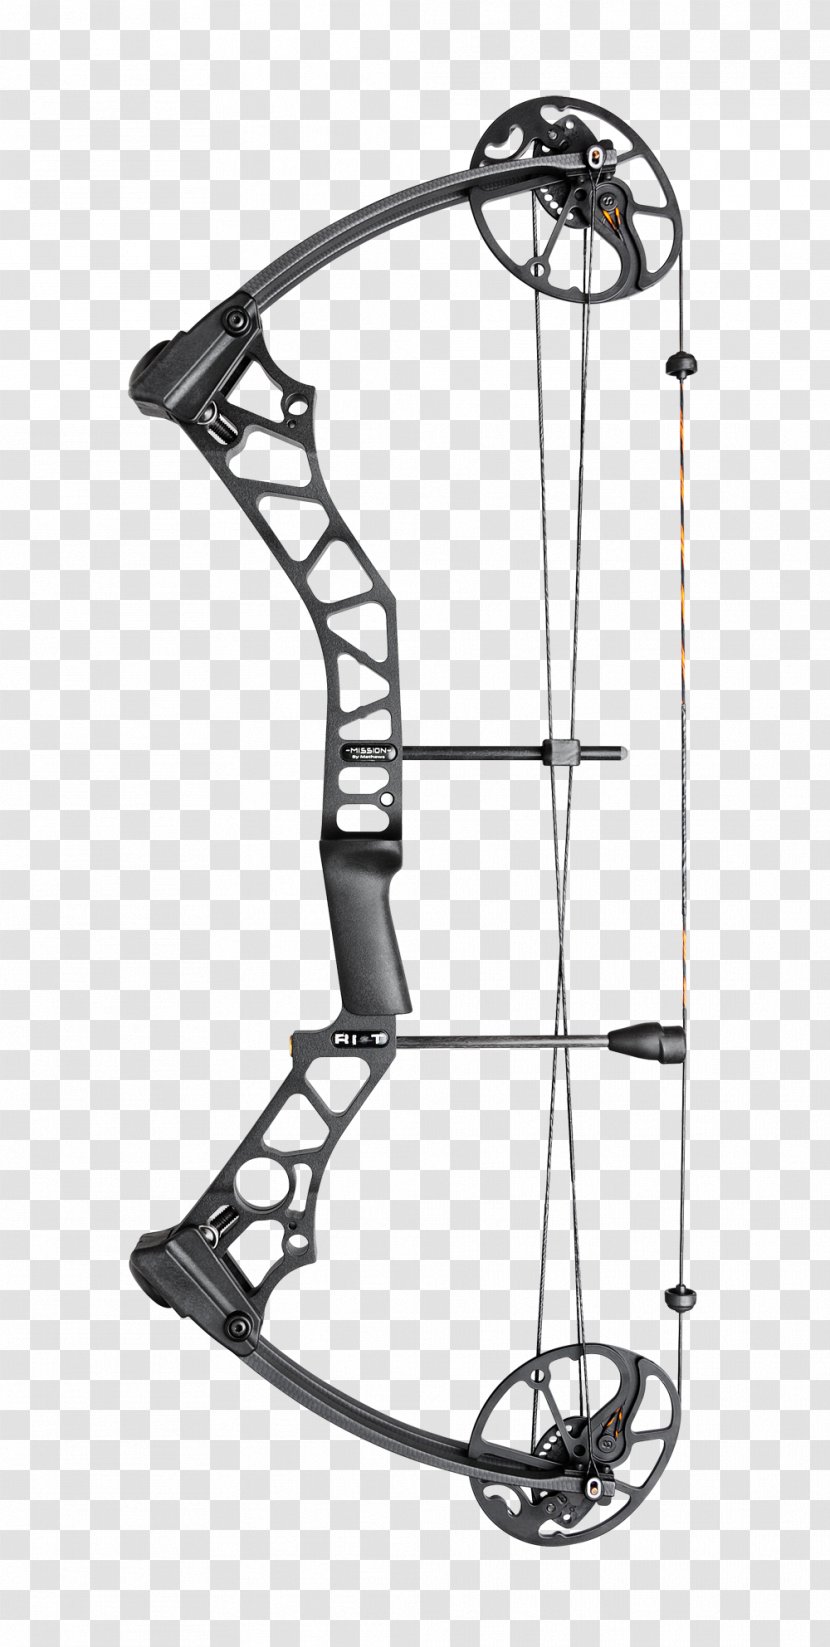 Compound Bows Bow And Arrow Archery Hunting - Black White Transparent PNG